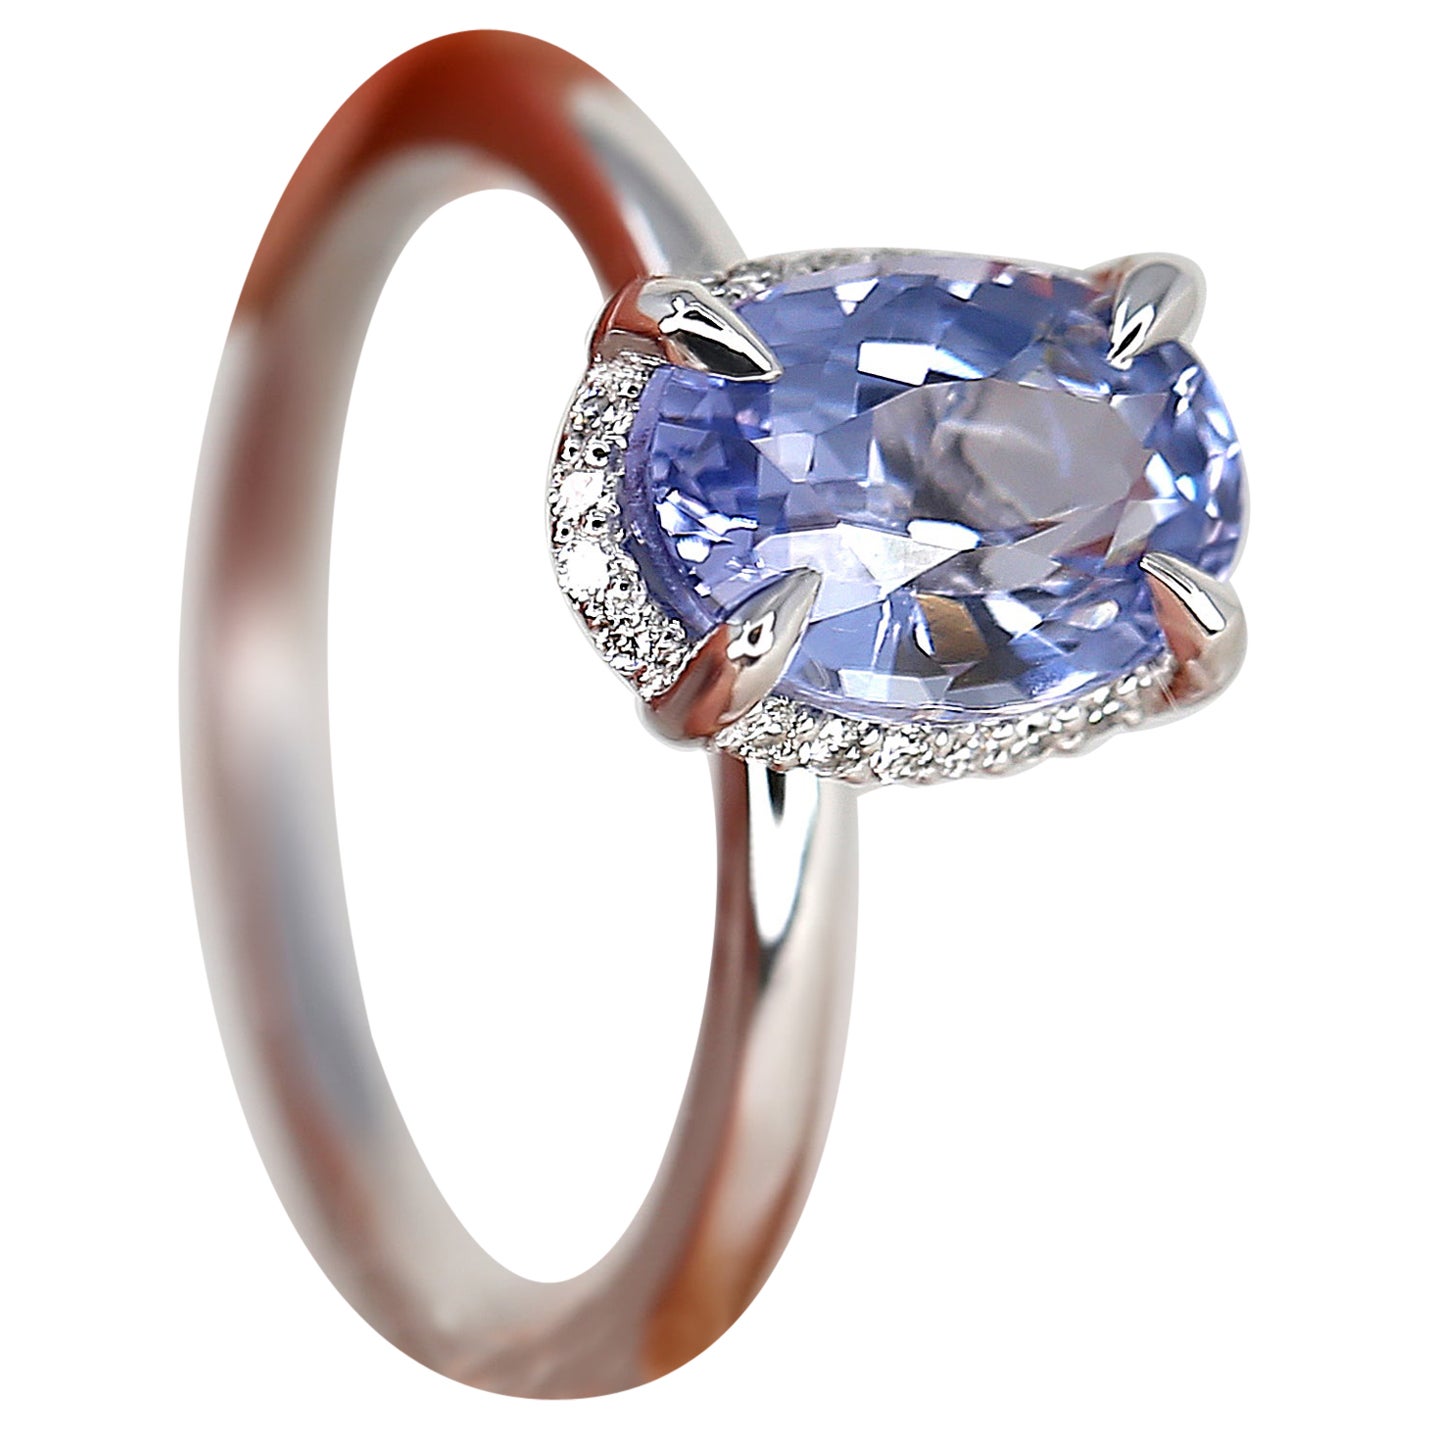 Experience the epitome of luxury with our 2.49ct Waverly sapphire ring, where secret diamonds gracefully peek from above. This exquisite piece features a stunning cornflower blue sapphire with lavender undertones, beautifully set in a 14kt white